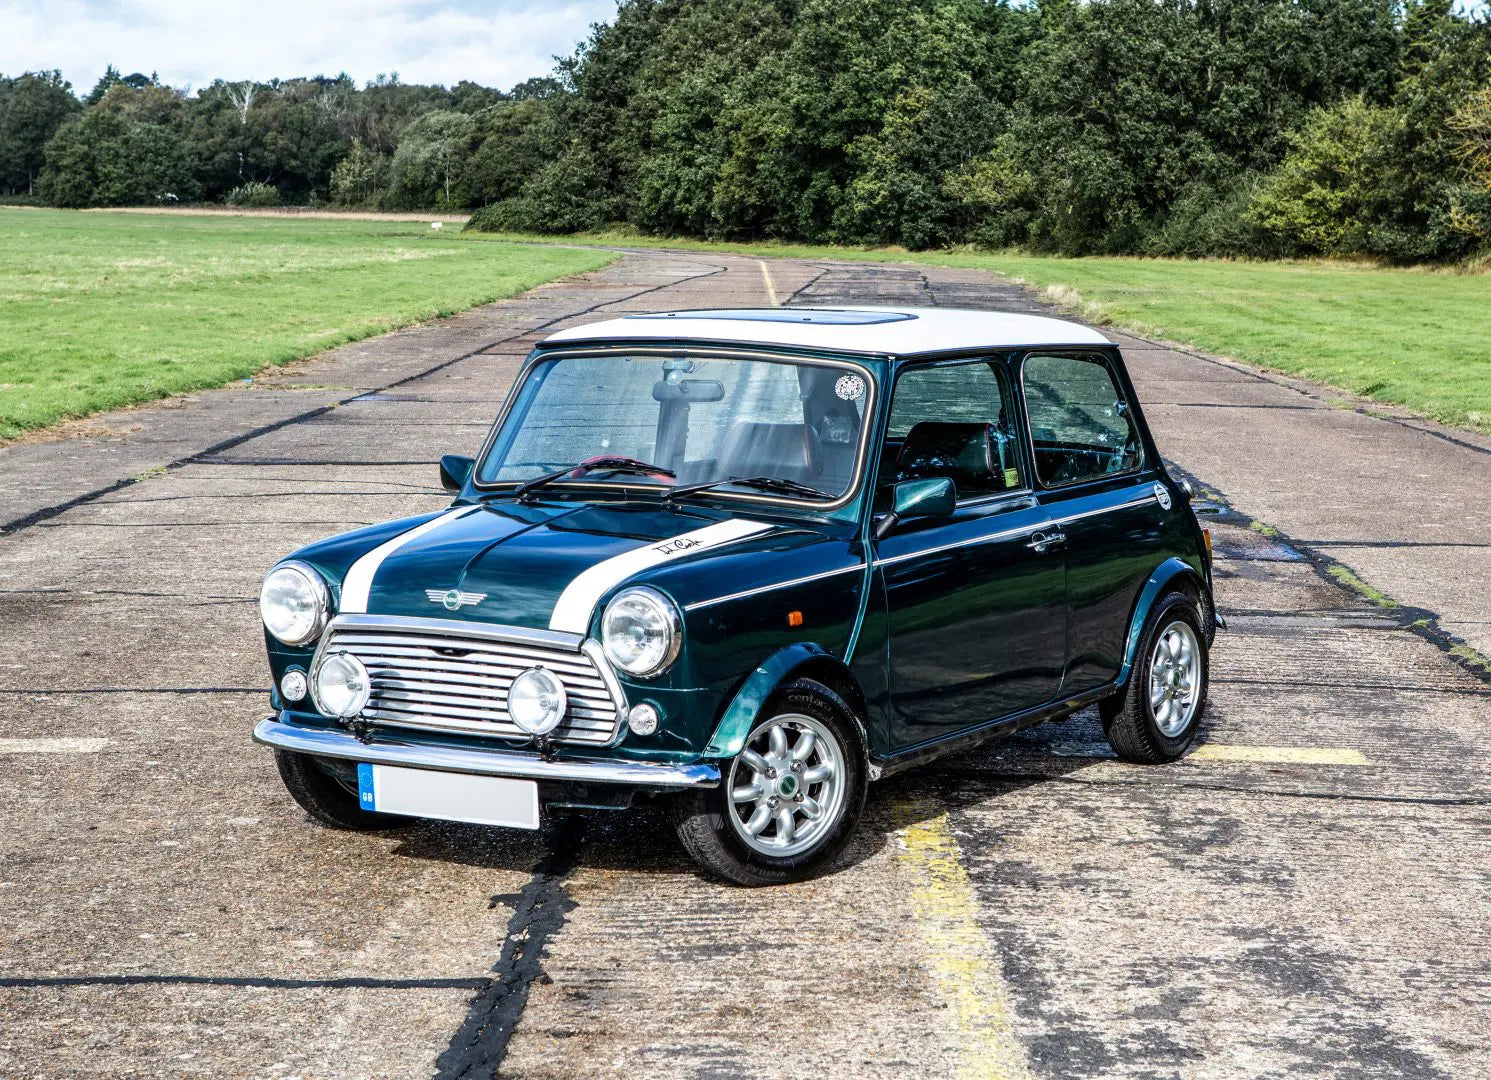 The Rover Mini Cooper RSP – An Insight